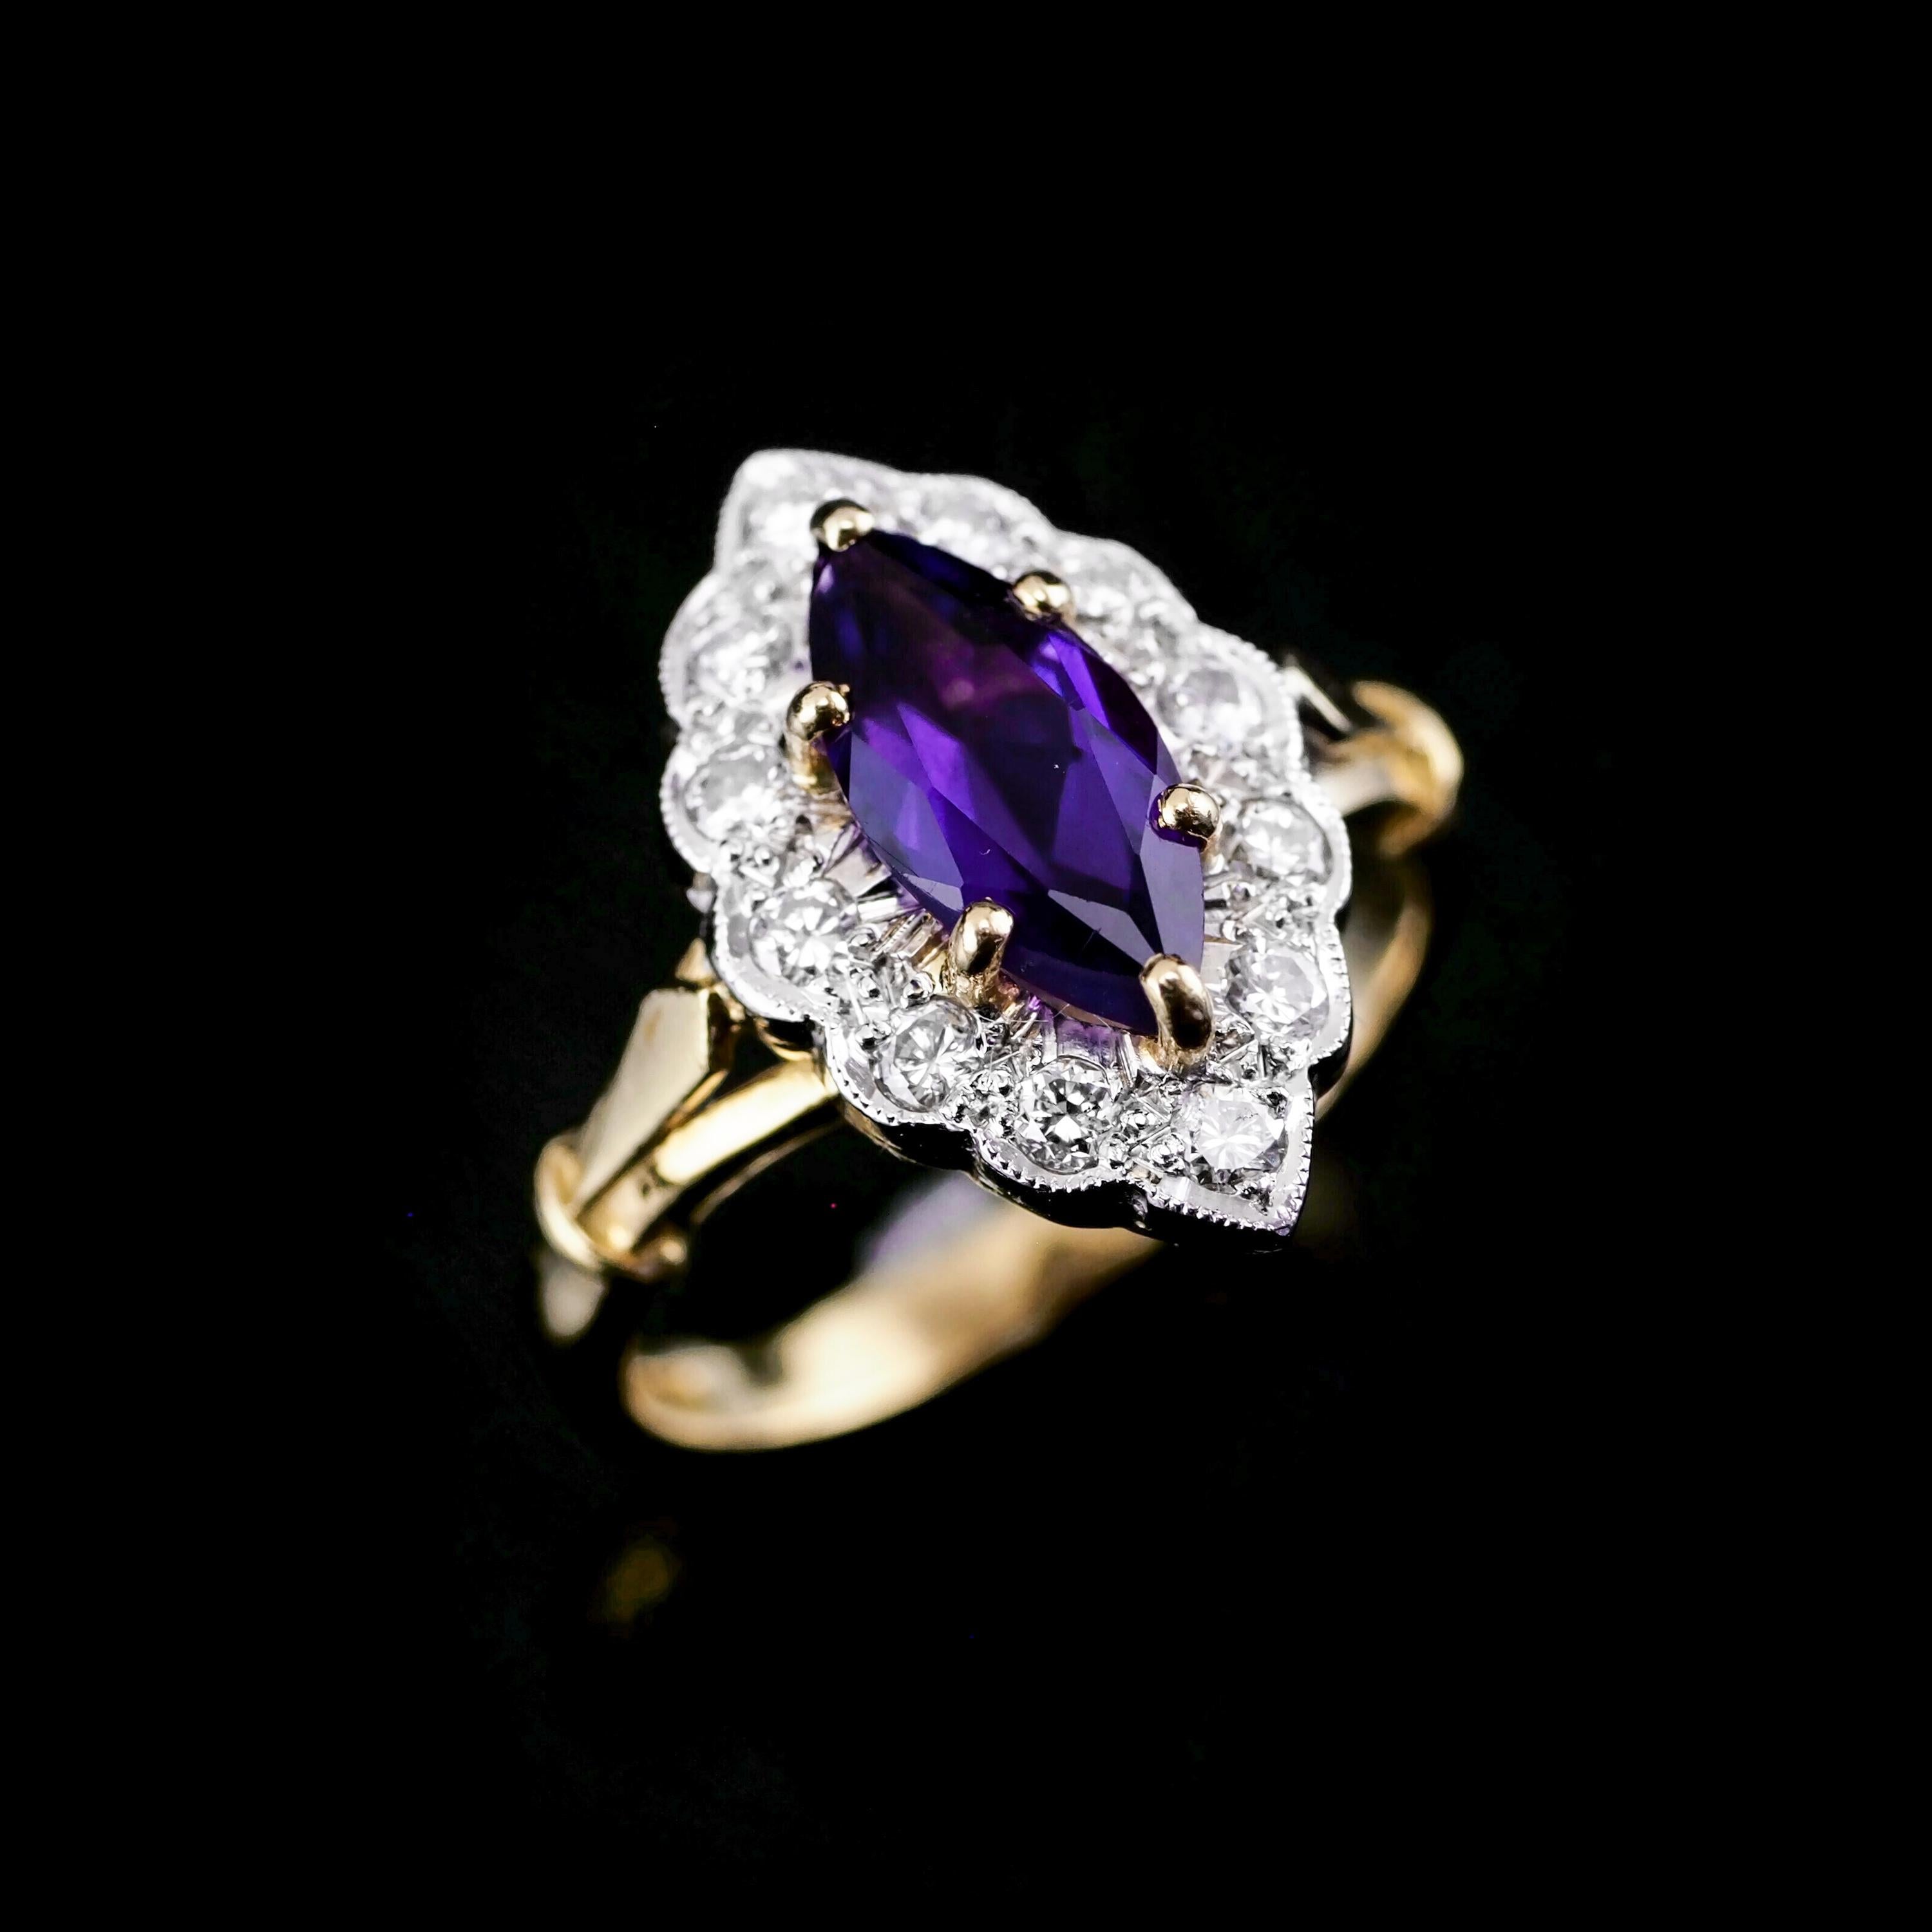 We are delighted to offer this wonderful vintage 18K gold amethyst & diamond marquise ring.

The ring features a magnificent large central amethyst (marquise cut 10mm x 5mm) with a nice deep rich purple hue.

The central amethyst is flanked by 12